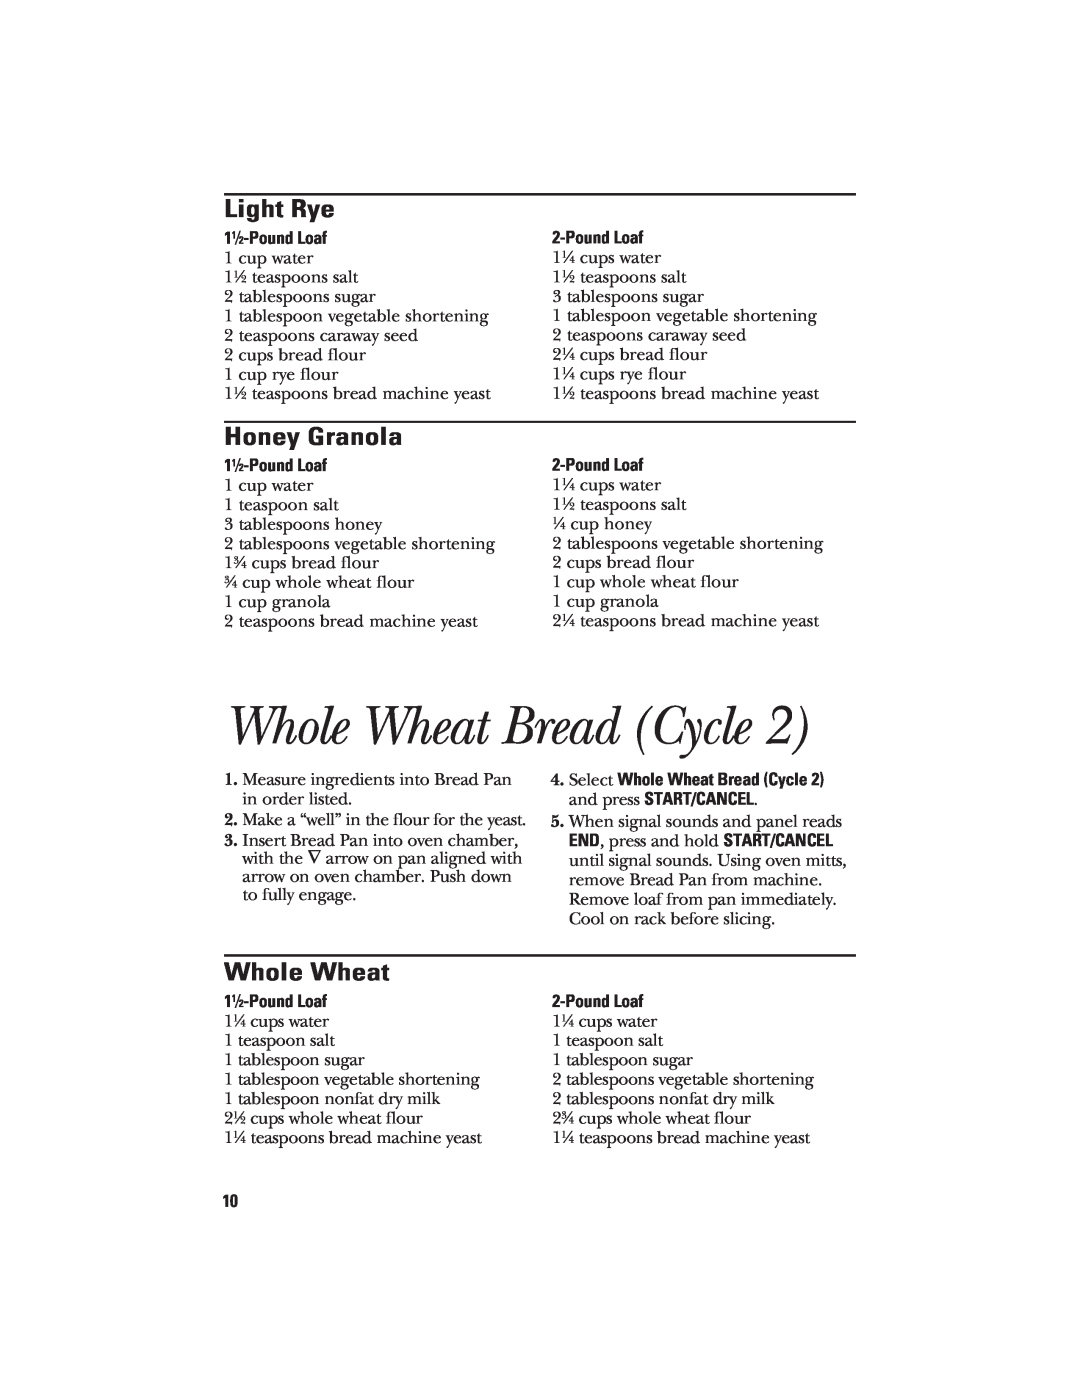 GE 840081500 quick start Whole Wheat Bread Cycle, Light Rye, Honey Granola, 11⁄2-Pound Loaf 